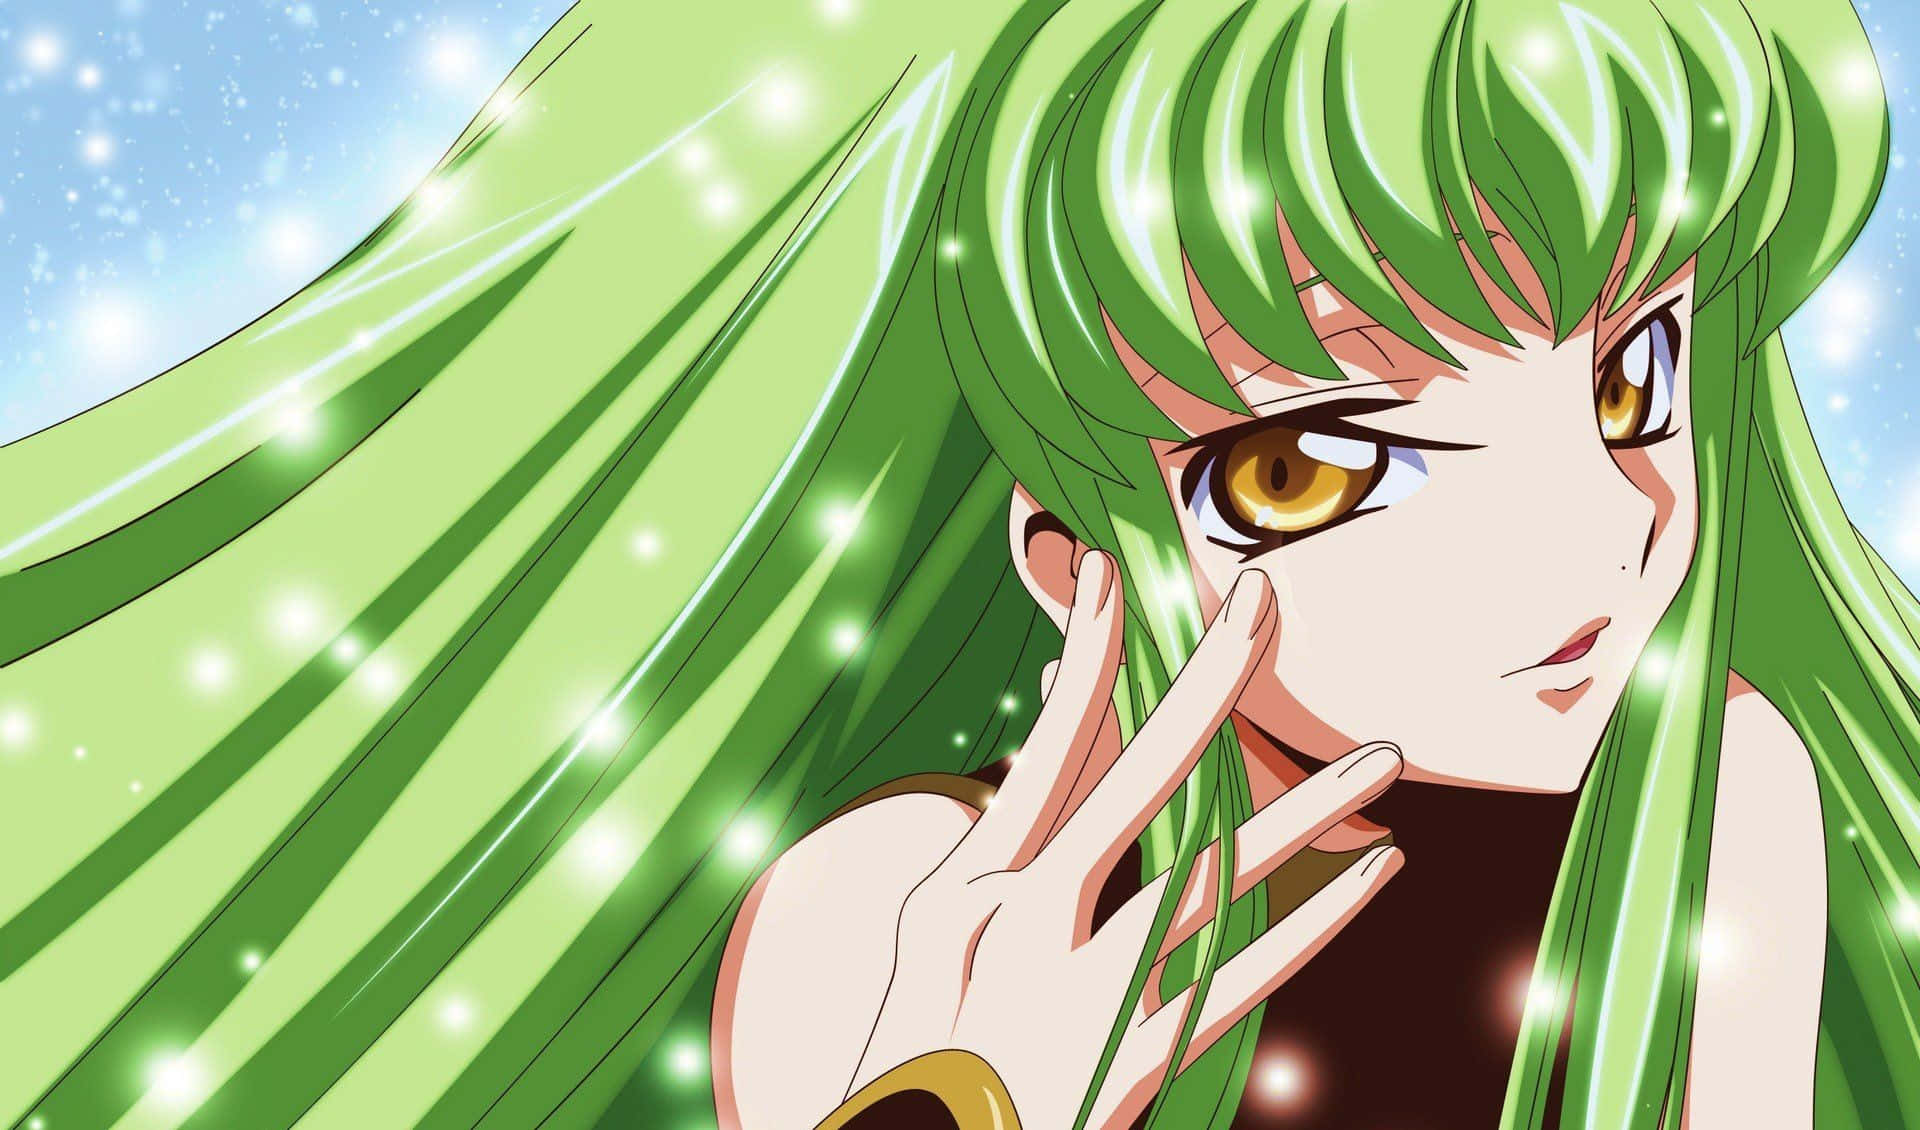 Download C.C. from Code Geass in a mesmerizing anime wallpaper Wallpaper